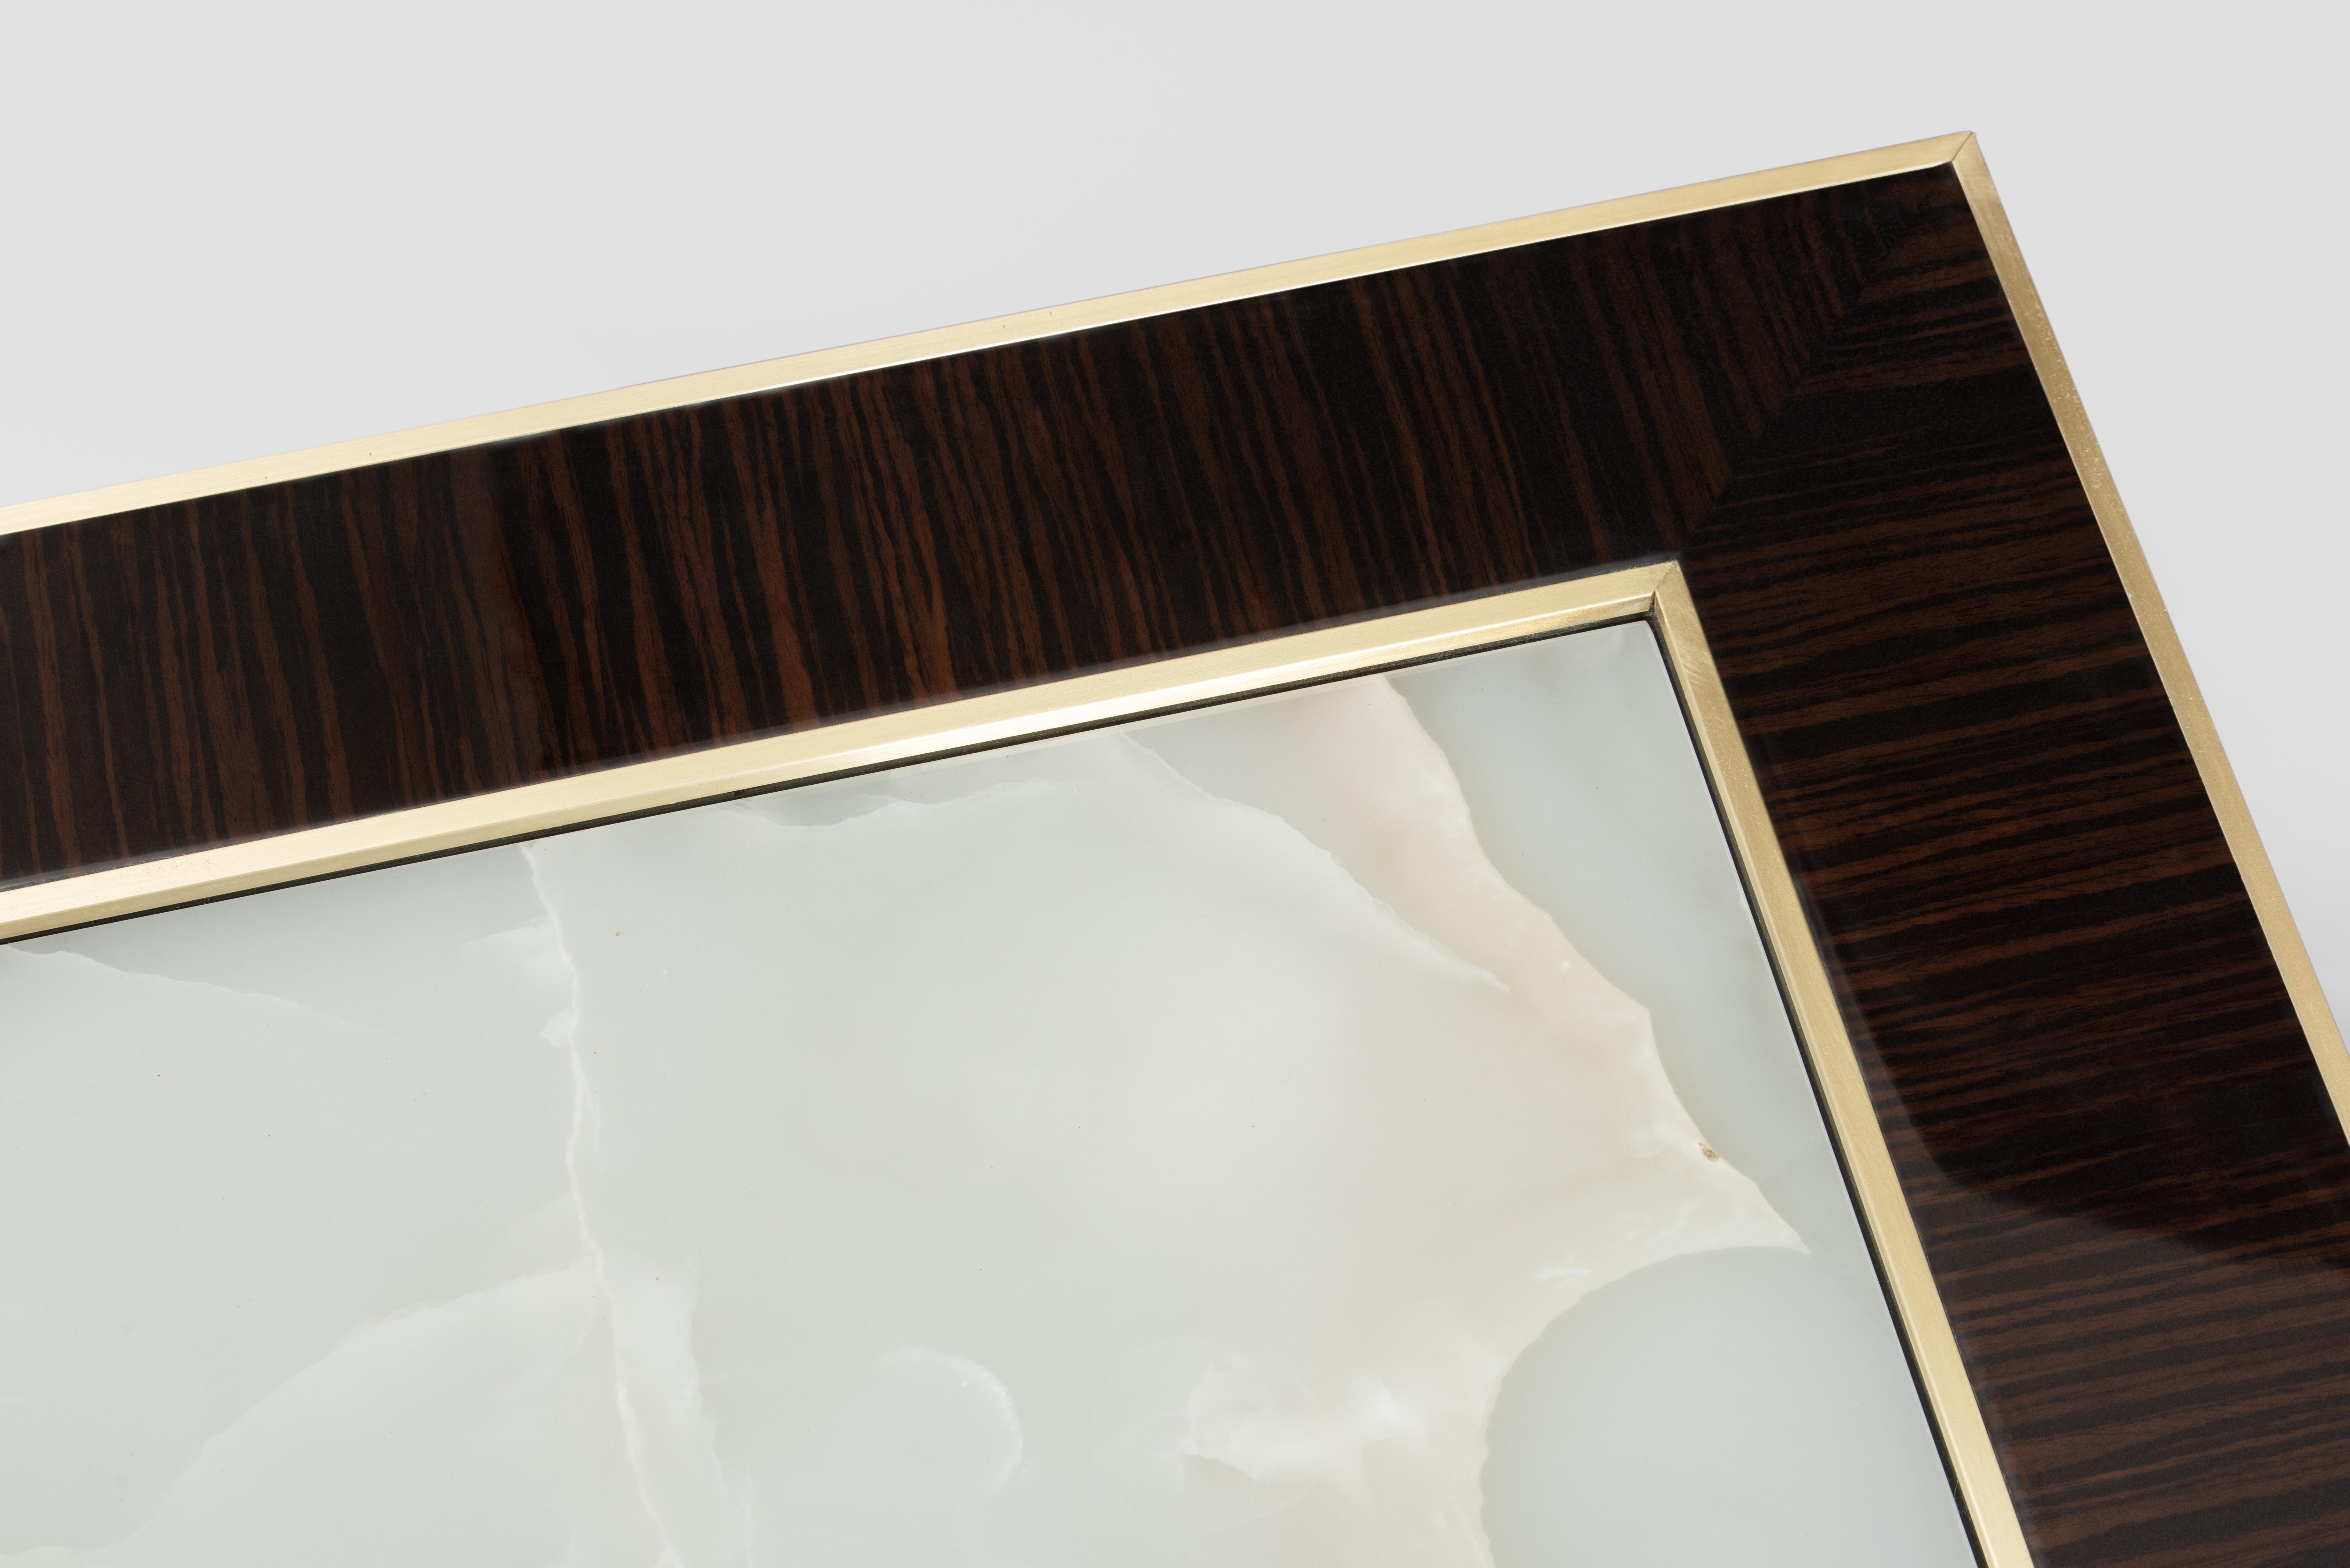 The side table is a piece with a warm, golden hue. The table top is made from honey onyx, a natural stone that has a beautiful, translucent quality and rich, warm colors. The onyx top is framed by a polished macassar ebony border with brass inlay,